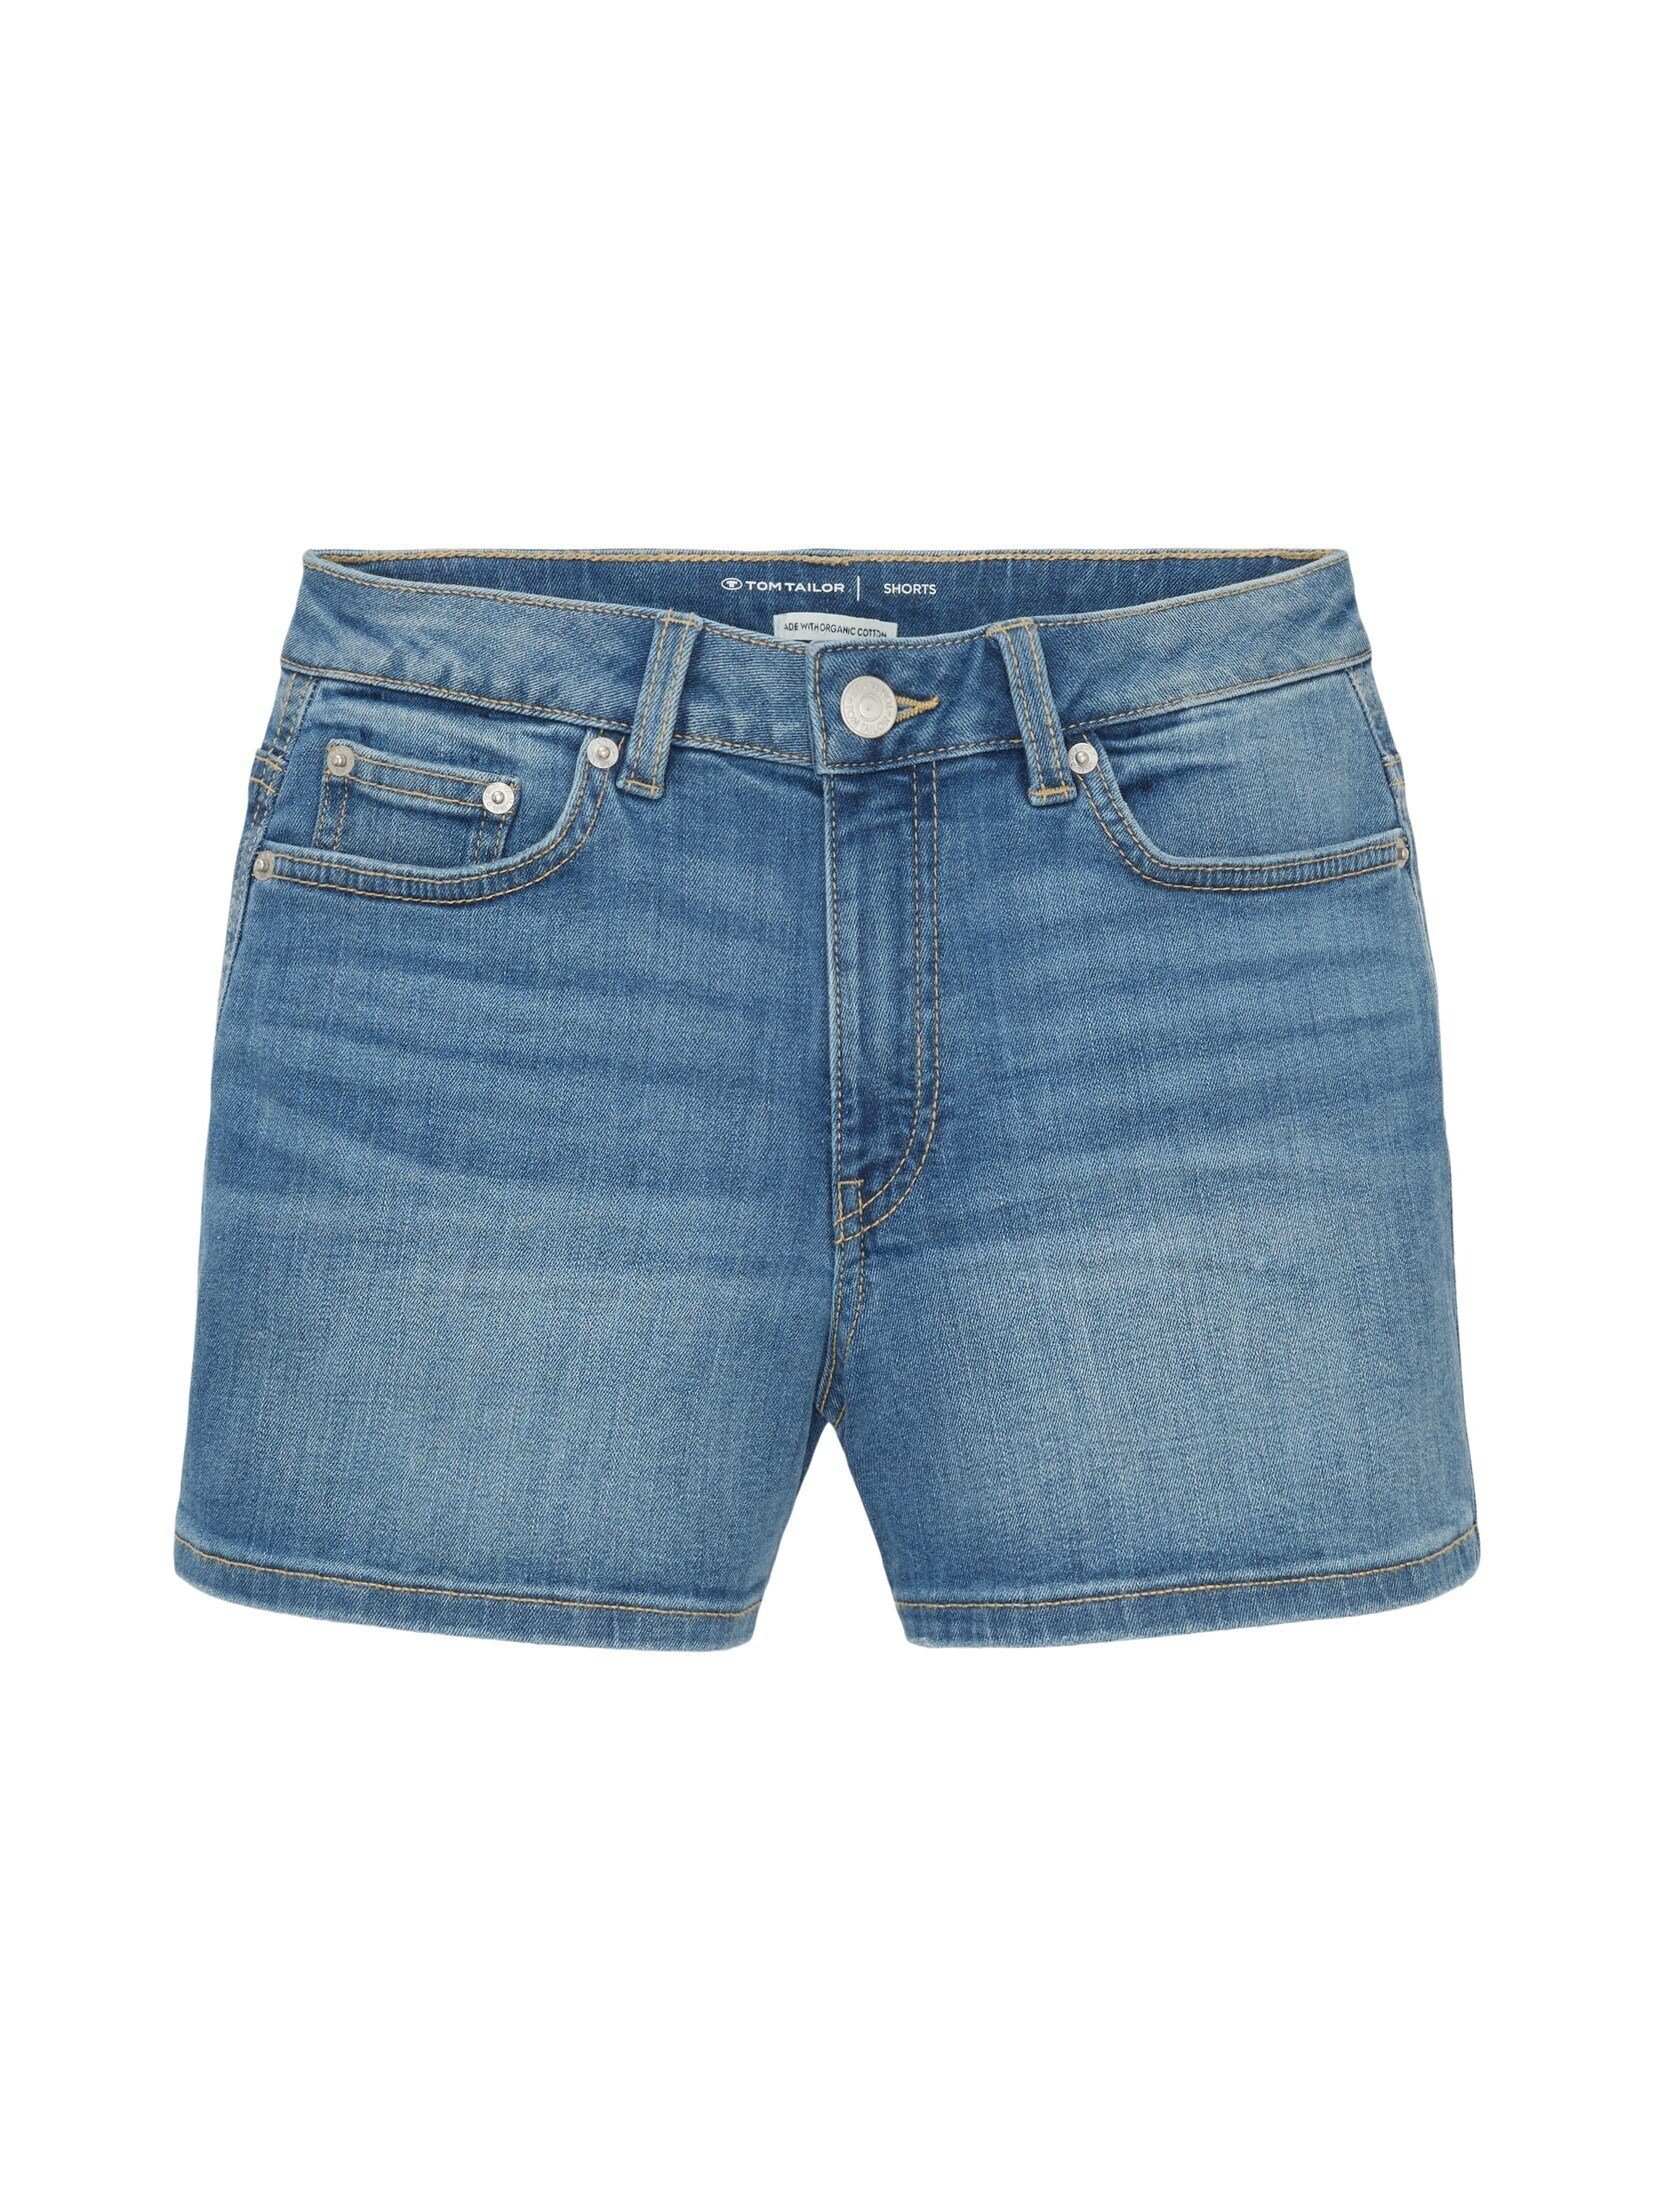 TOM TAILOR Jeansshorts Jeansshorts mit leichter Waschung Used Mid Stone Blue Denim